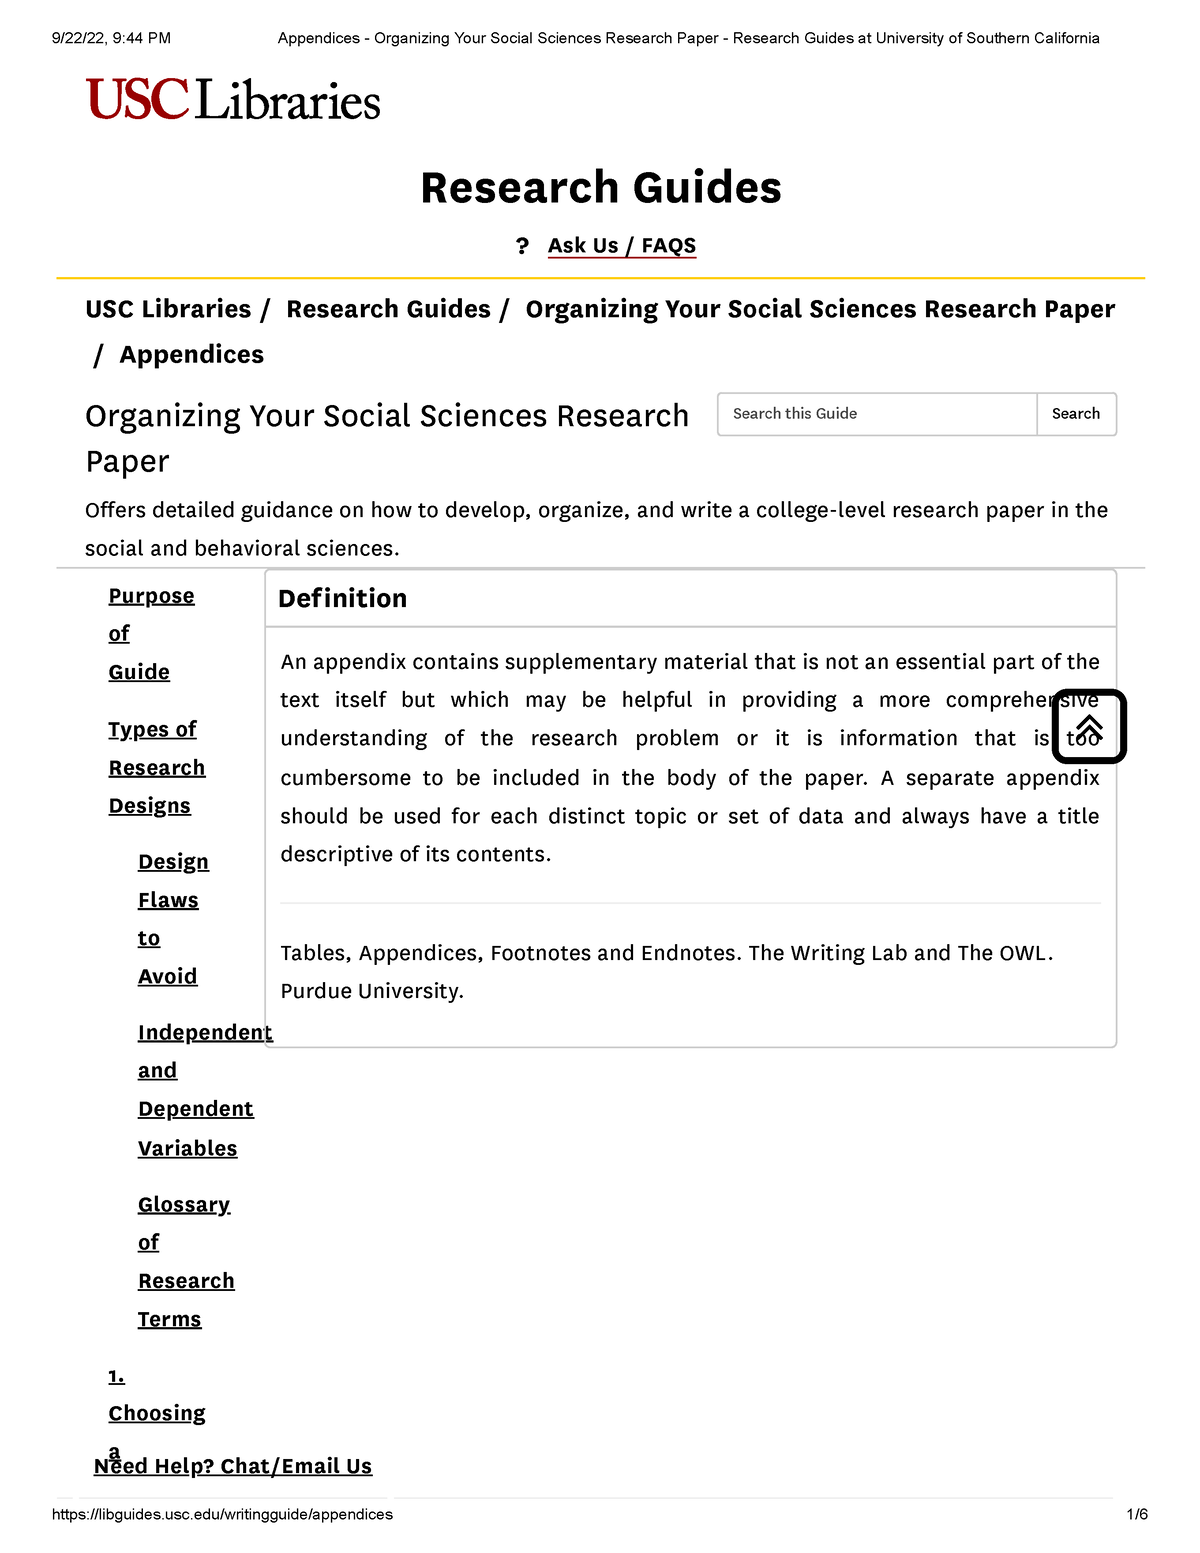 purpose of appendices in research paper